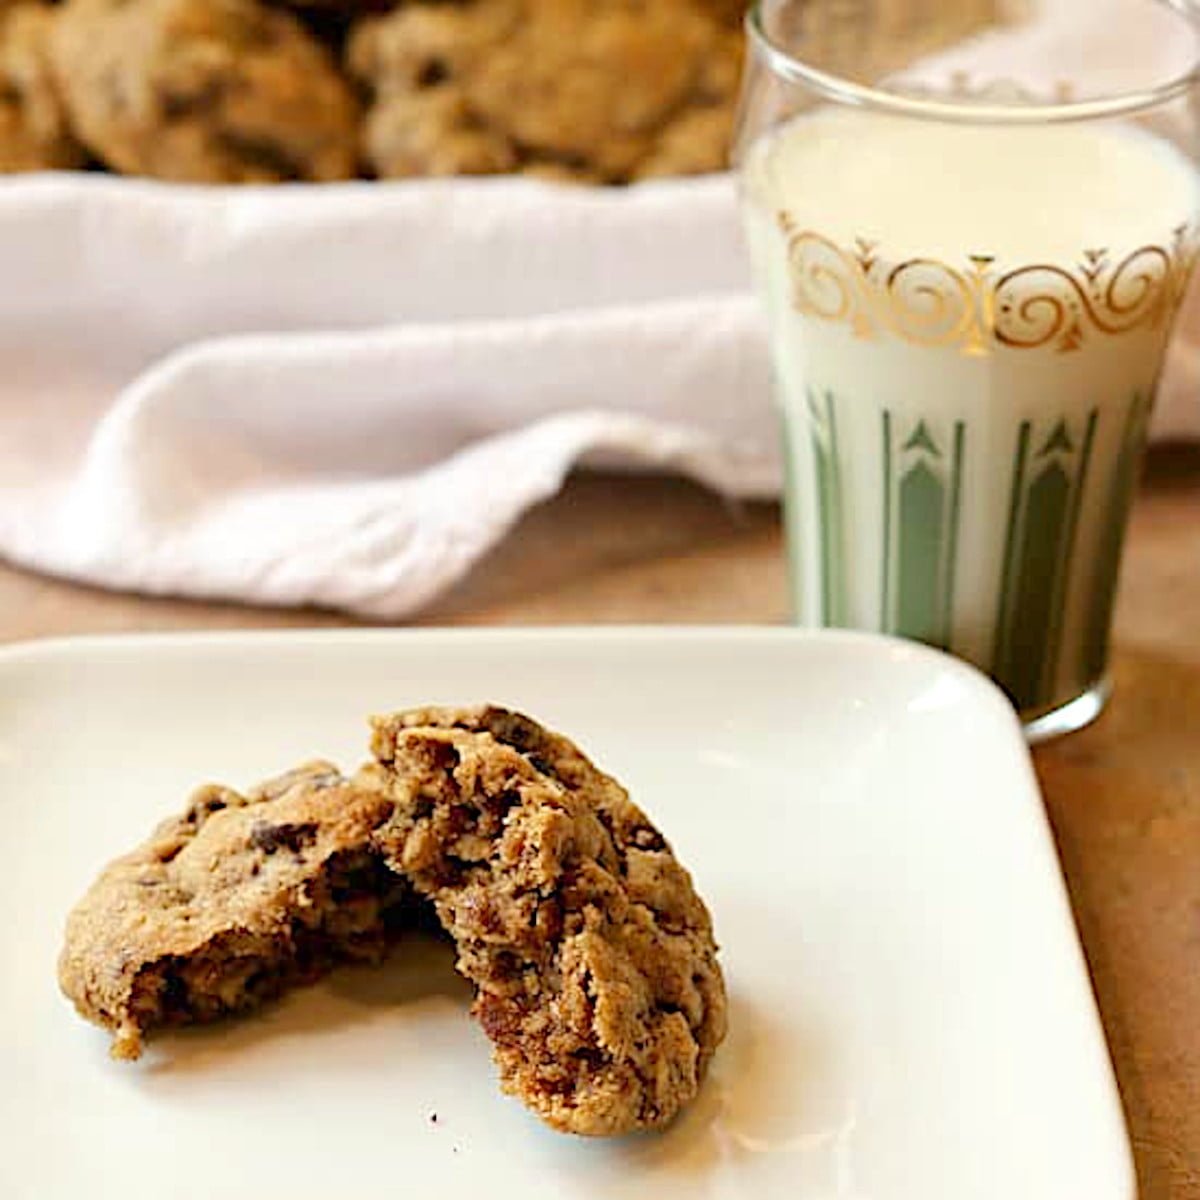 Oatmeal chocolate chip nursing cookies cropped